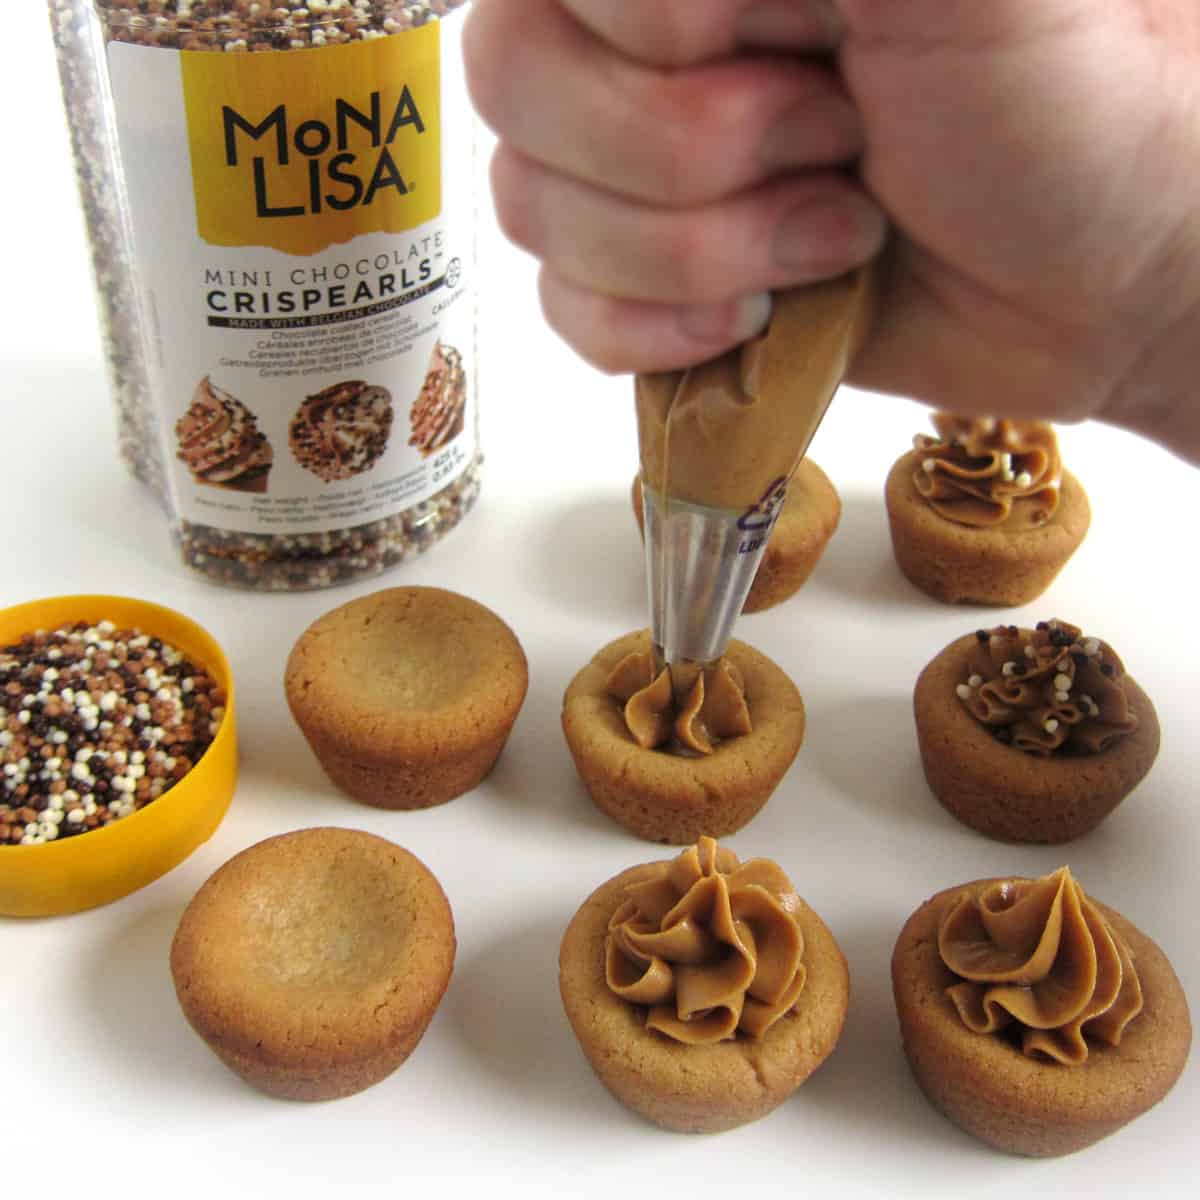 topping peanut butter cookie cups with peanut butter and Mona Lisa chocolate Crispearls